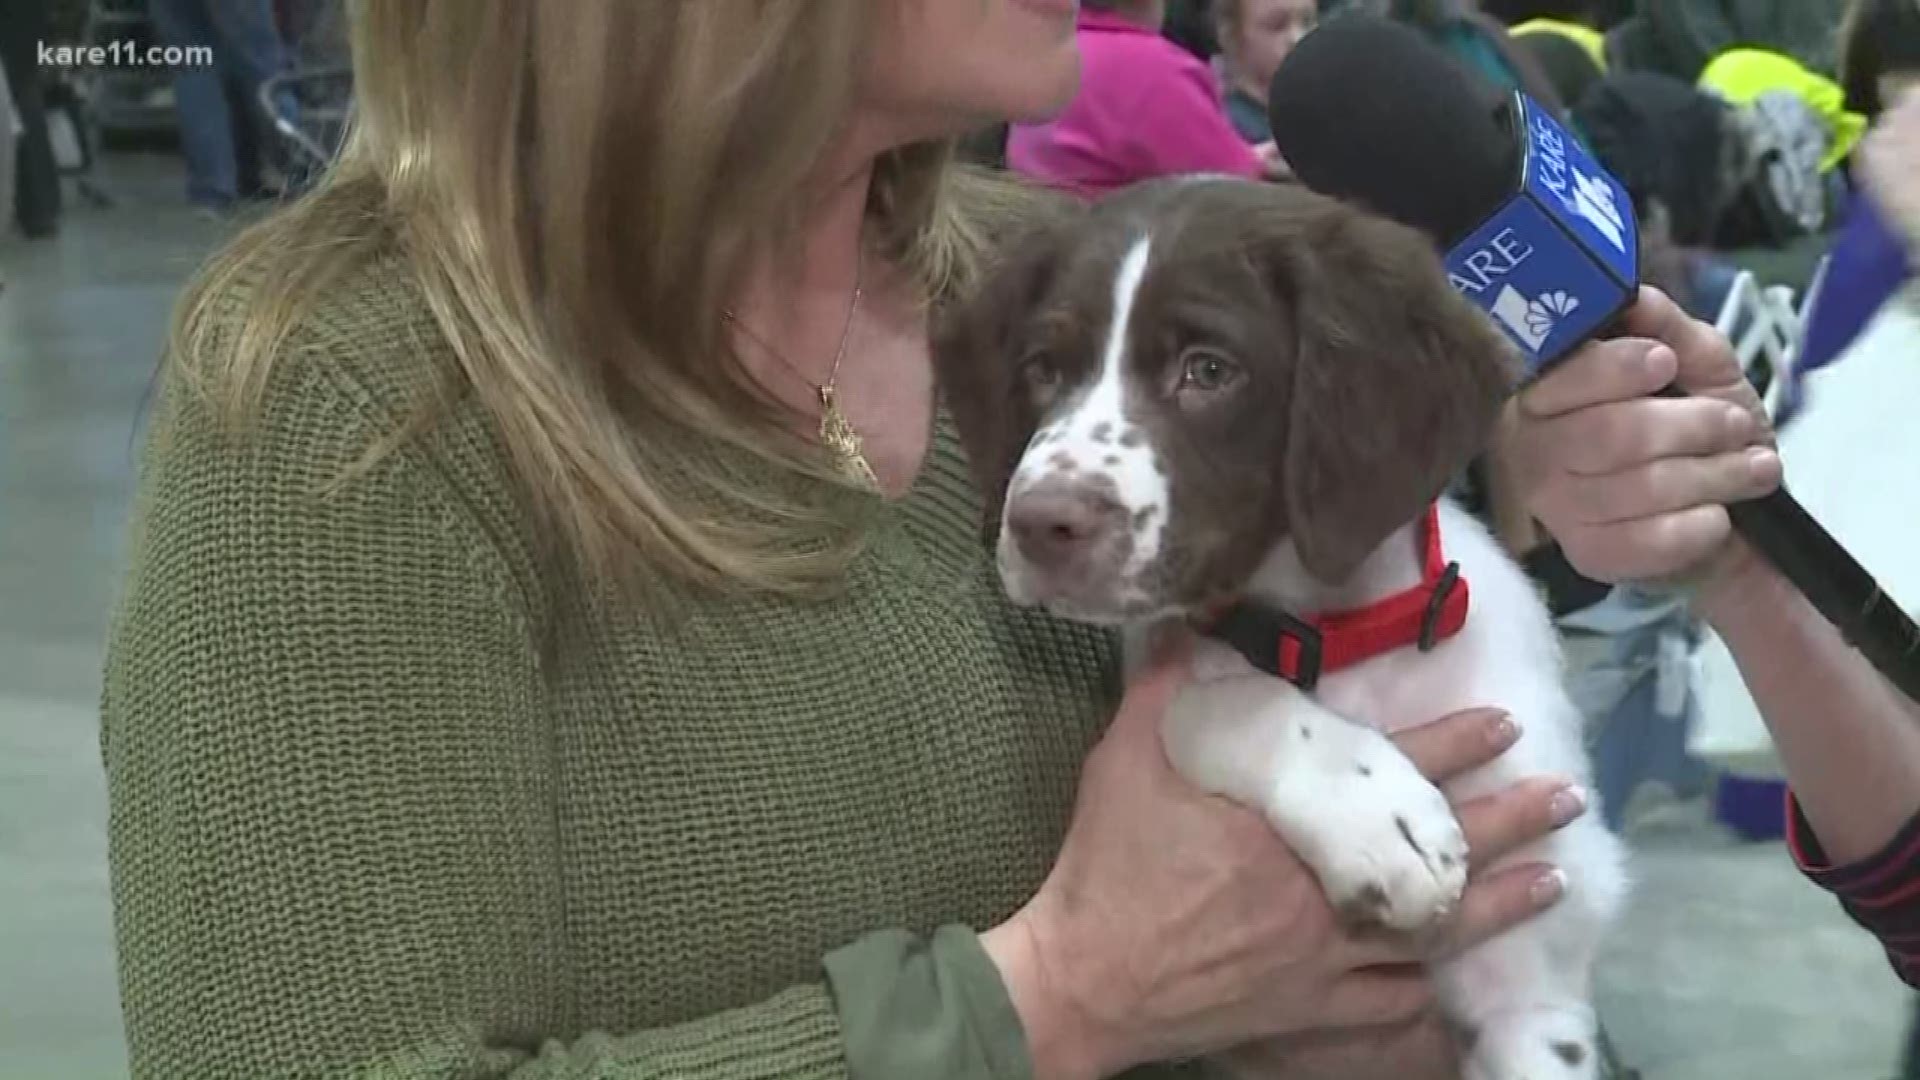 Lee Valsvik was live at the Land O' Lakes Dog Show to check out some of the more than the 1,600 dogs competing. https://www.kare11.com/article/news/local/kare11-saturday/land-o-lakes-dog-show-returns-to-st-paul-for-another-year/89-3515931c-91e2-4a3f-8c86-